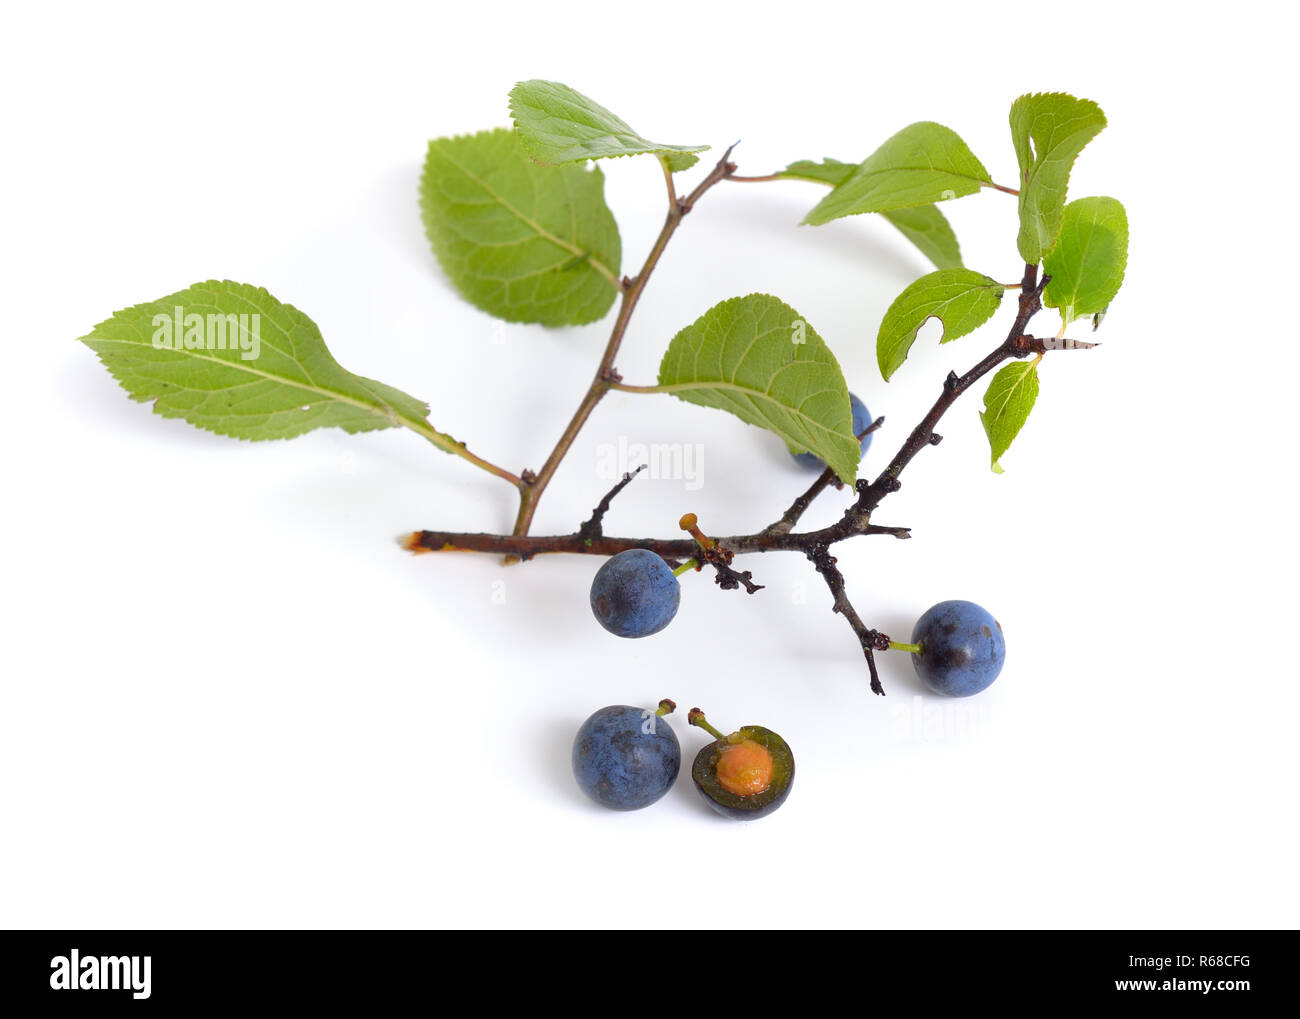 Prunus spinosa or blackthorn, or sloe. Isolated twig with fruit. Stock Photo